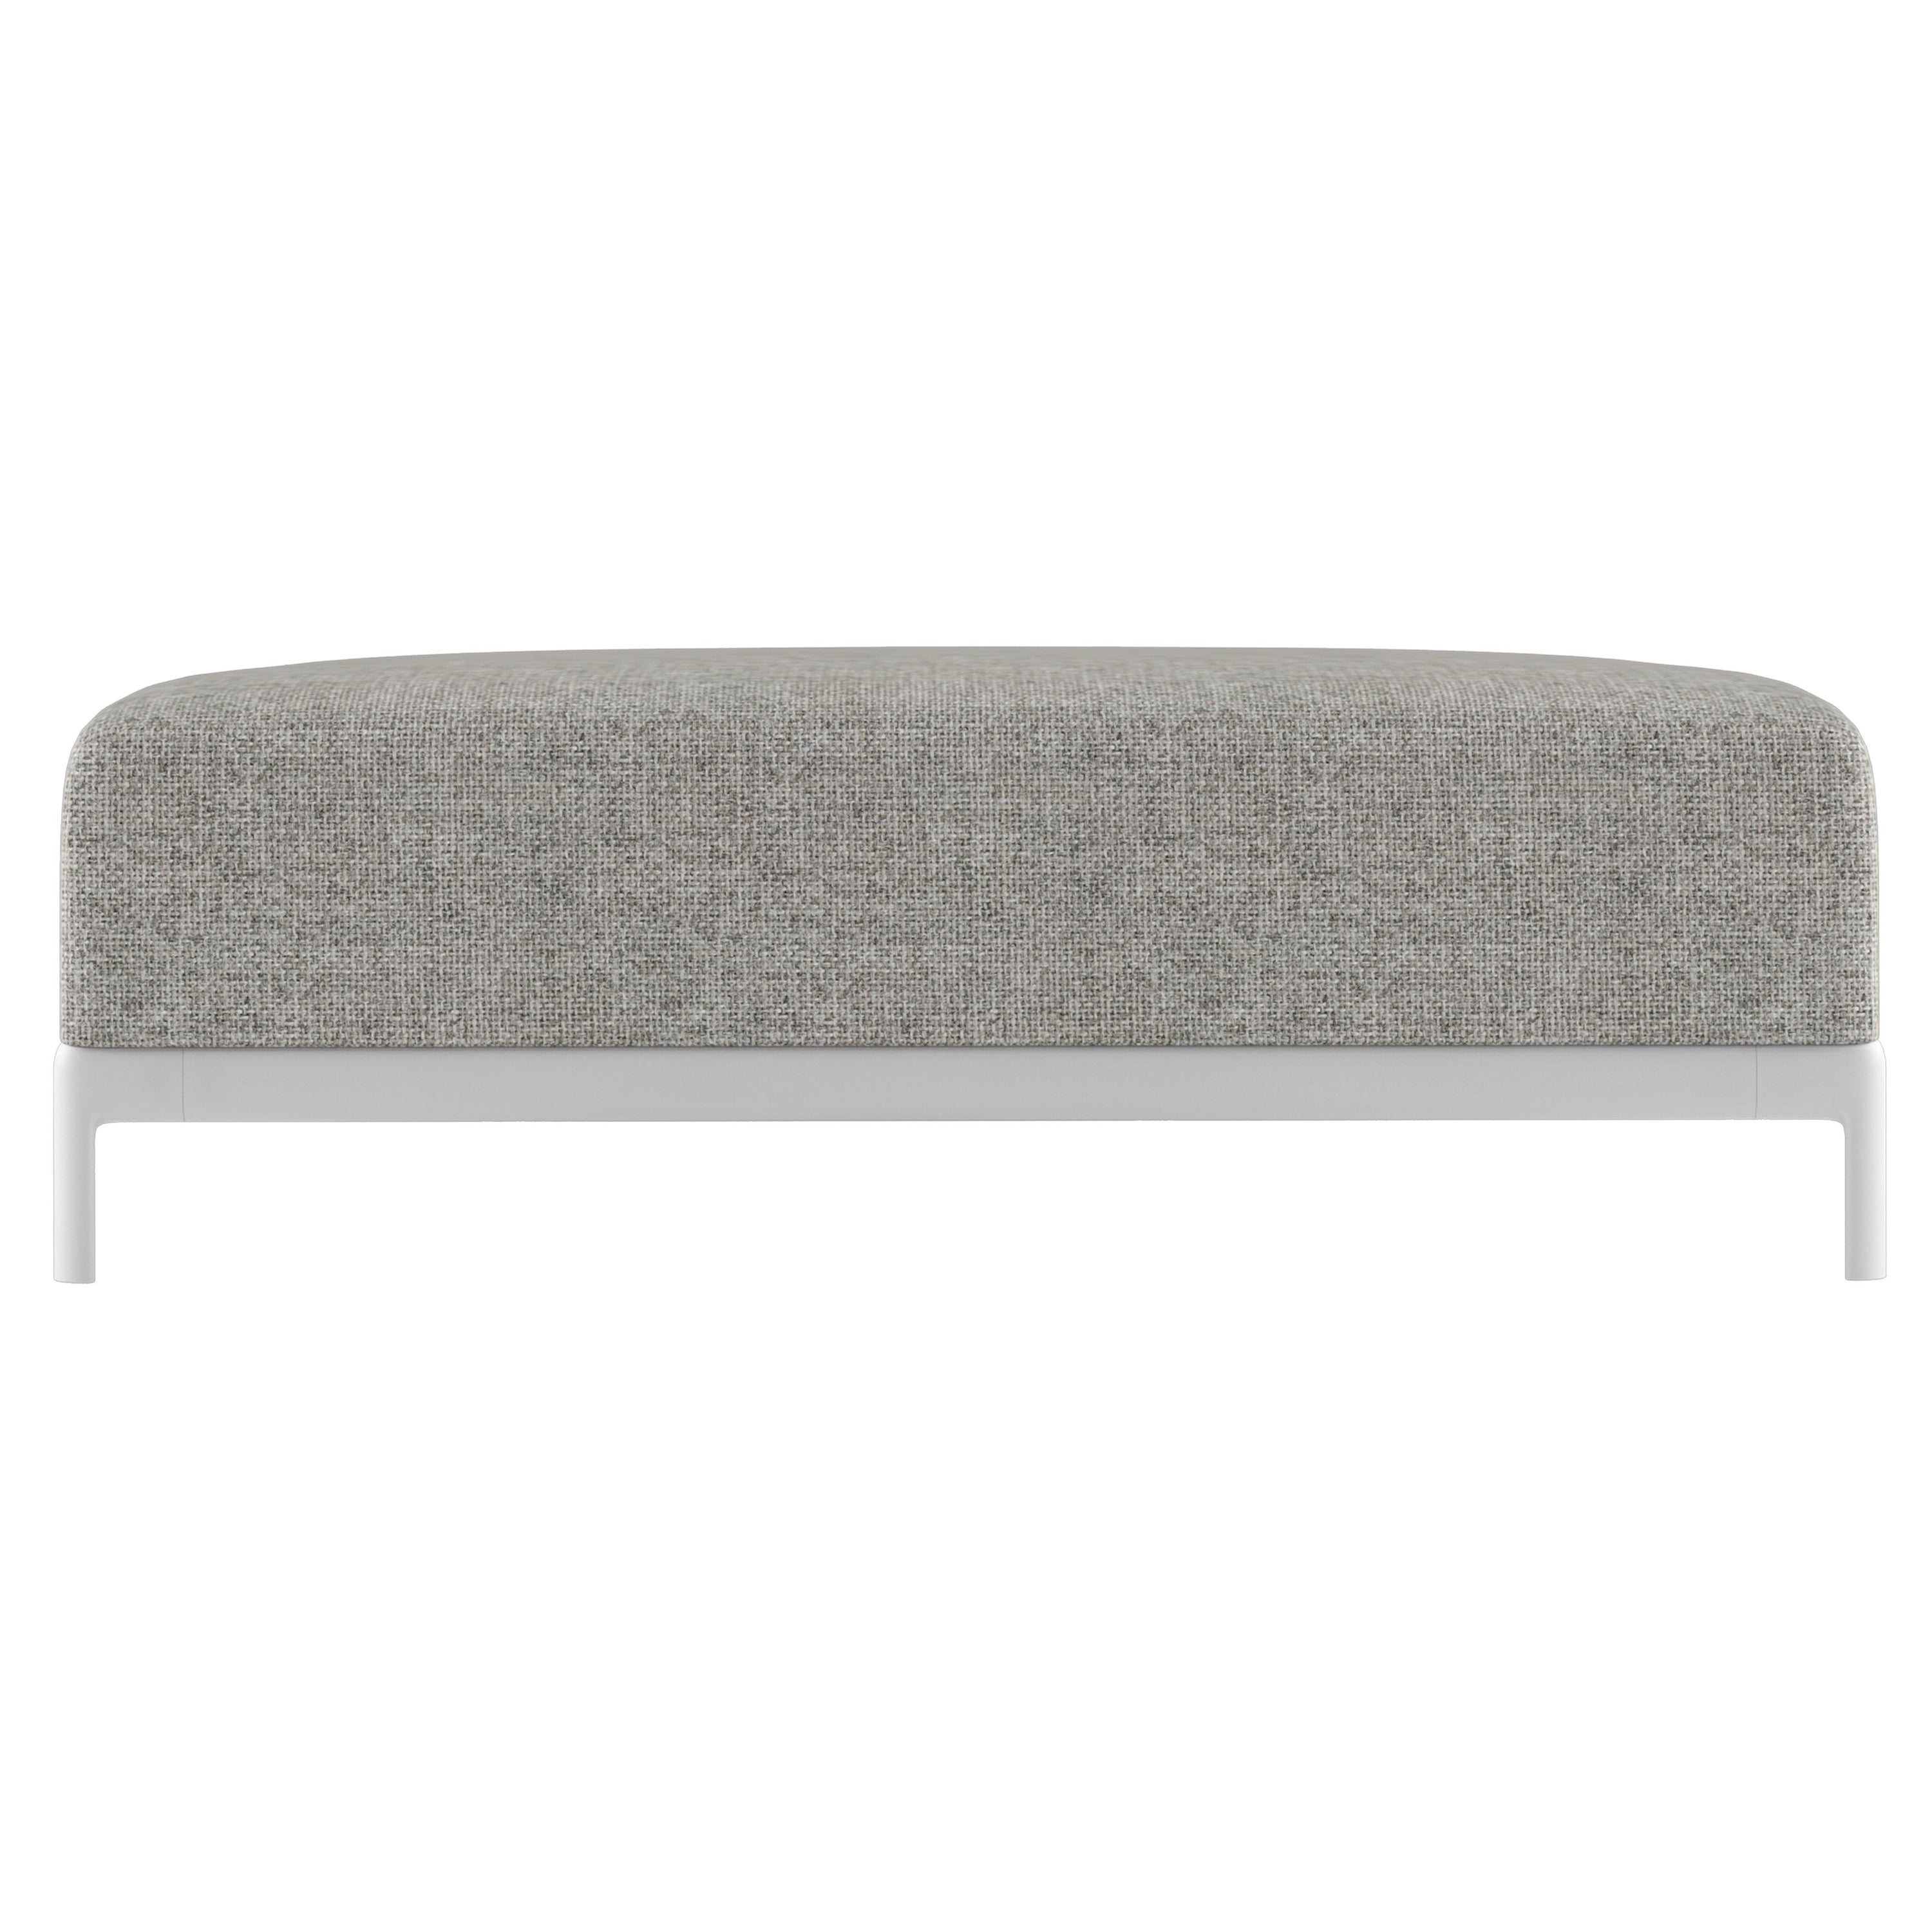 Alias P69 AluZen Soft Pouf Sofa Outdoor in Upholstery with Aluminium Frame For Sale